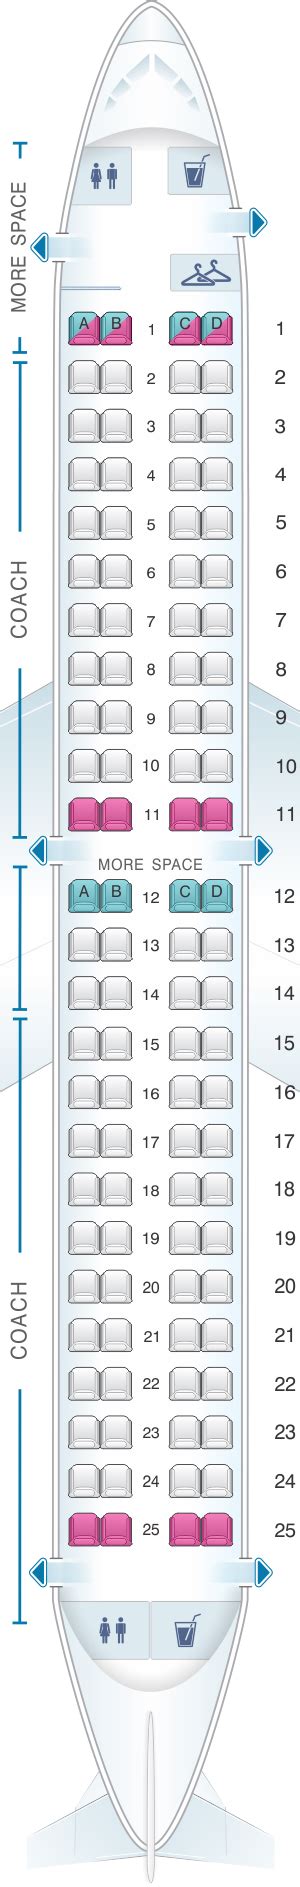 Jetblue e190 seat map. Seat Map jetBlue Airways Airbus A321. Airplane Airbus A321 jetBlue Airways with 2 classes and 200 seats on board. Use airplane seat map to find which ones are more comfortable and which should be avoided. Tap the seat on the map to see the details. 